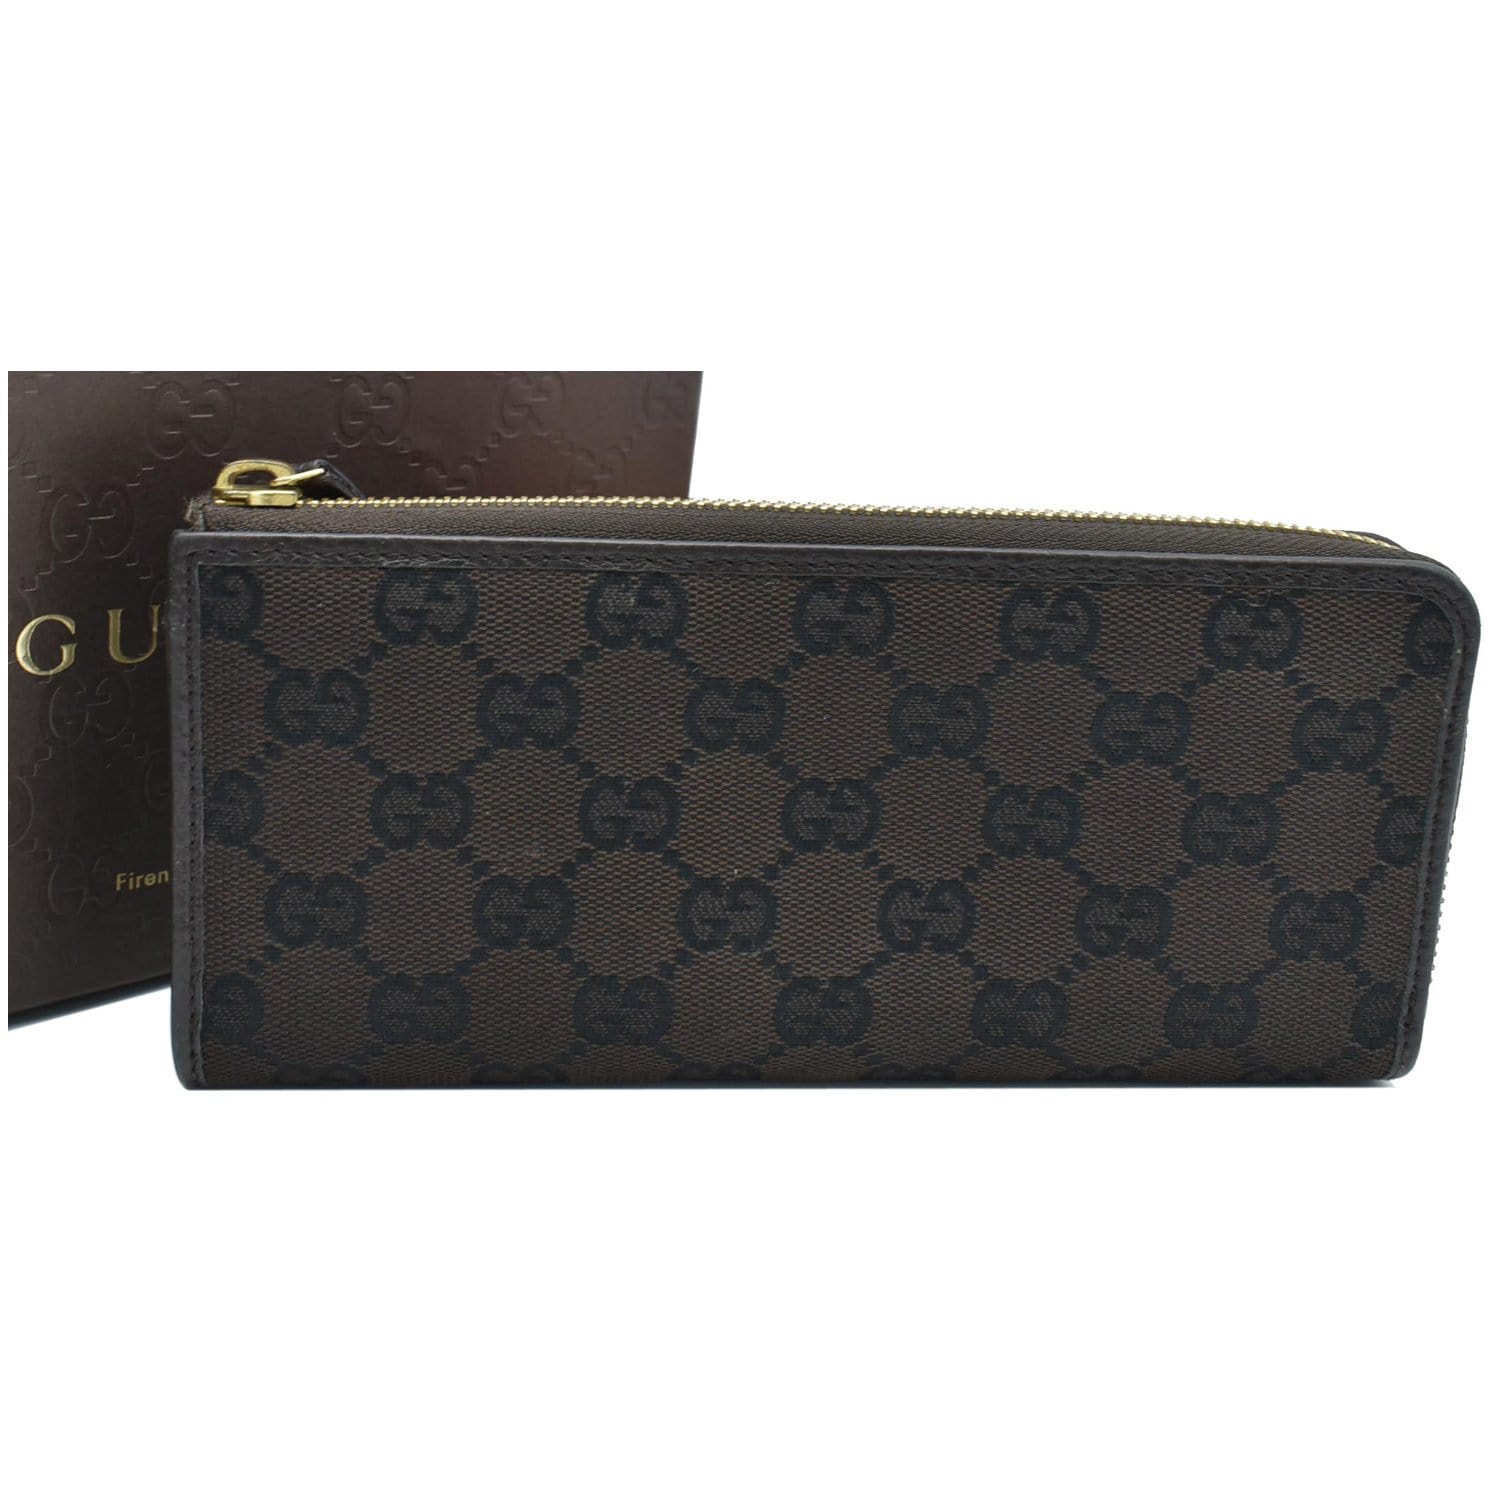 Gucci Web Beige Gg Canvas/Brown leather Long Wallet 353651 Zip Around at   Women's Clothing store